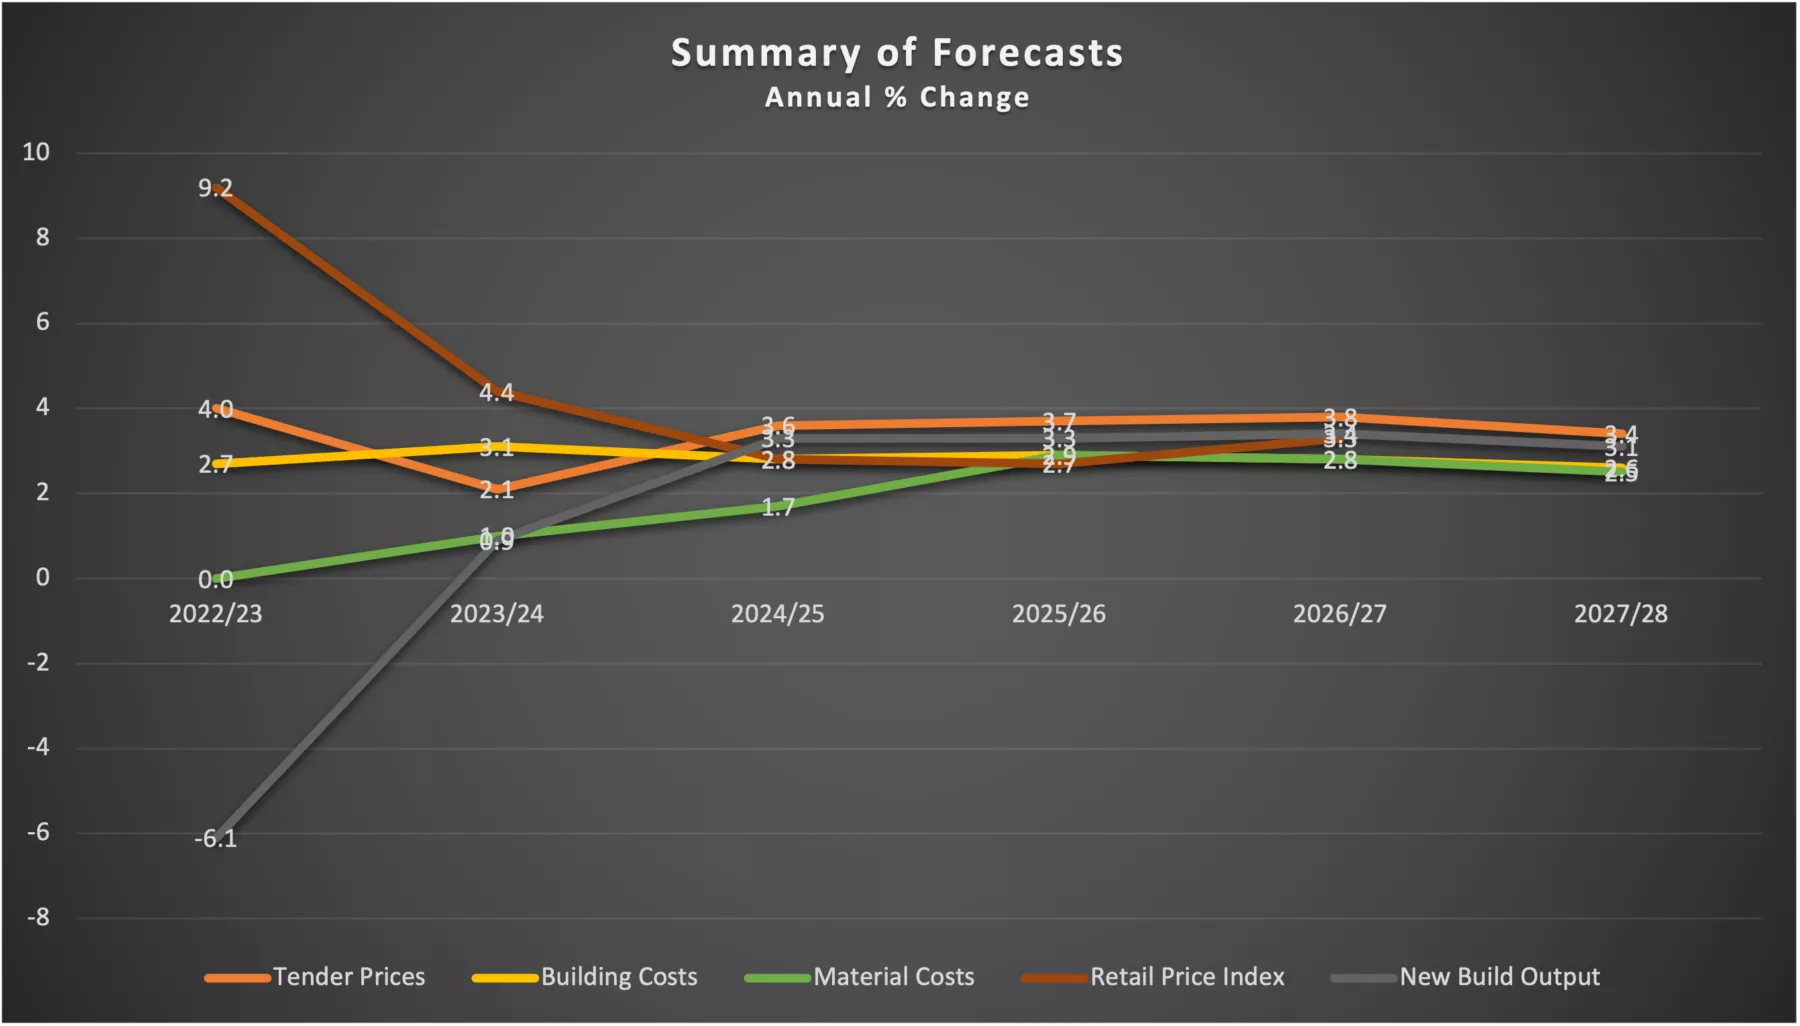 Market commentary graph showing a summary of forecasts with annual % change